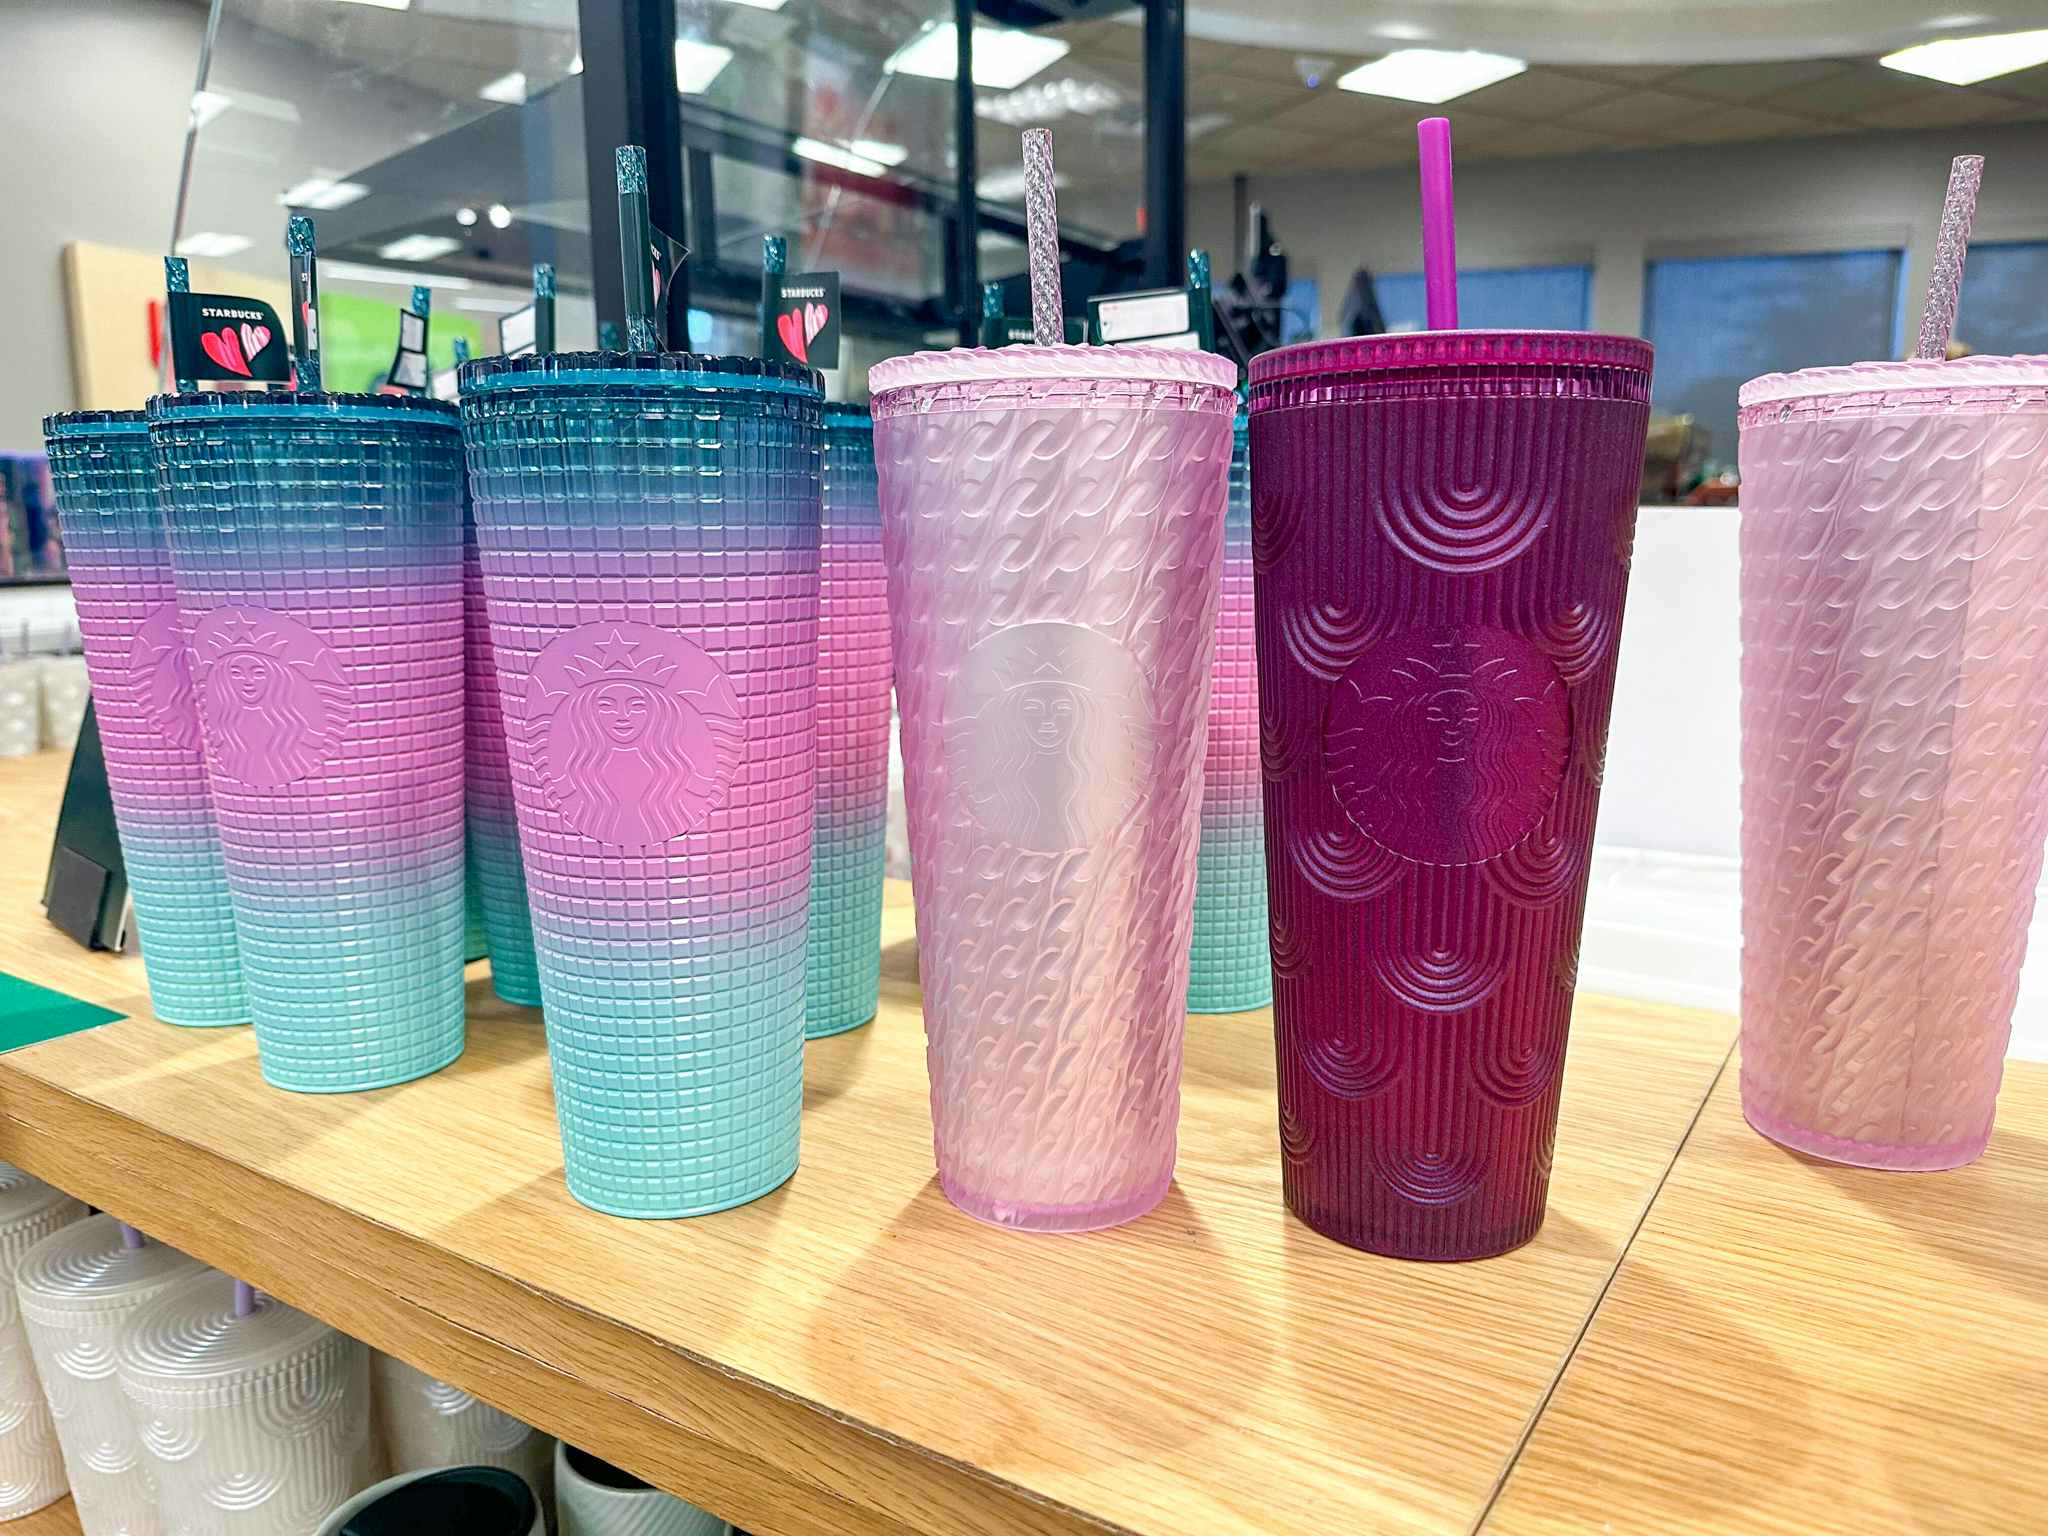 Check Your Stores: Starbucks Tumblers on Clearance for 75% Off at Target